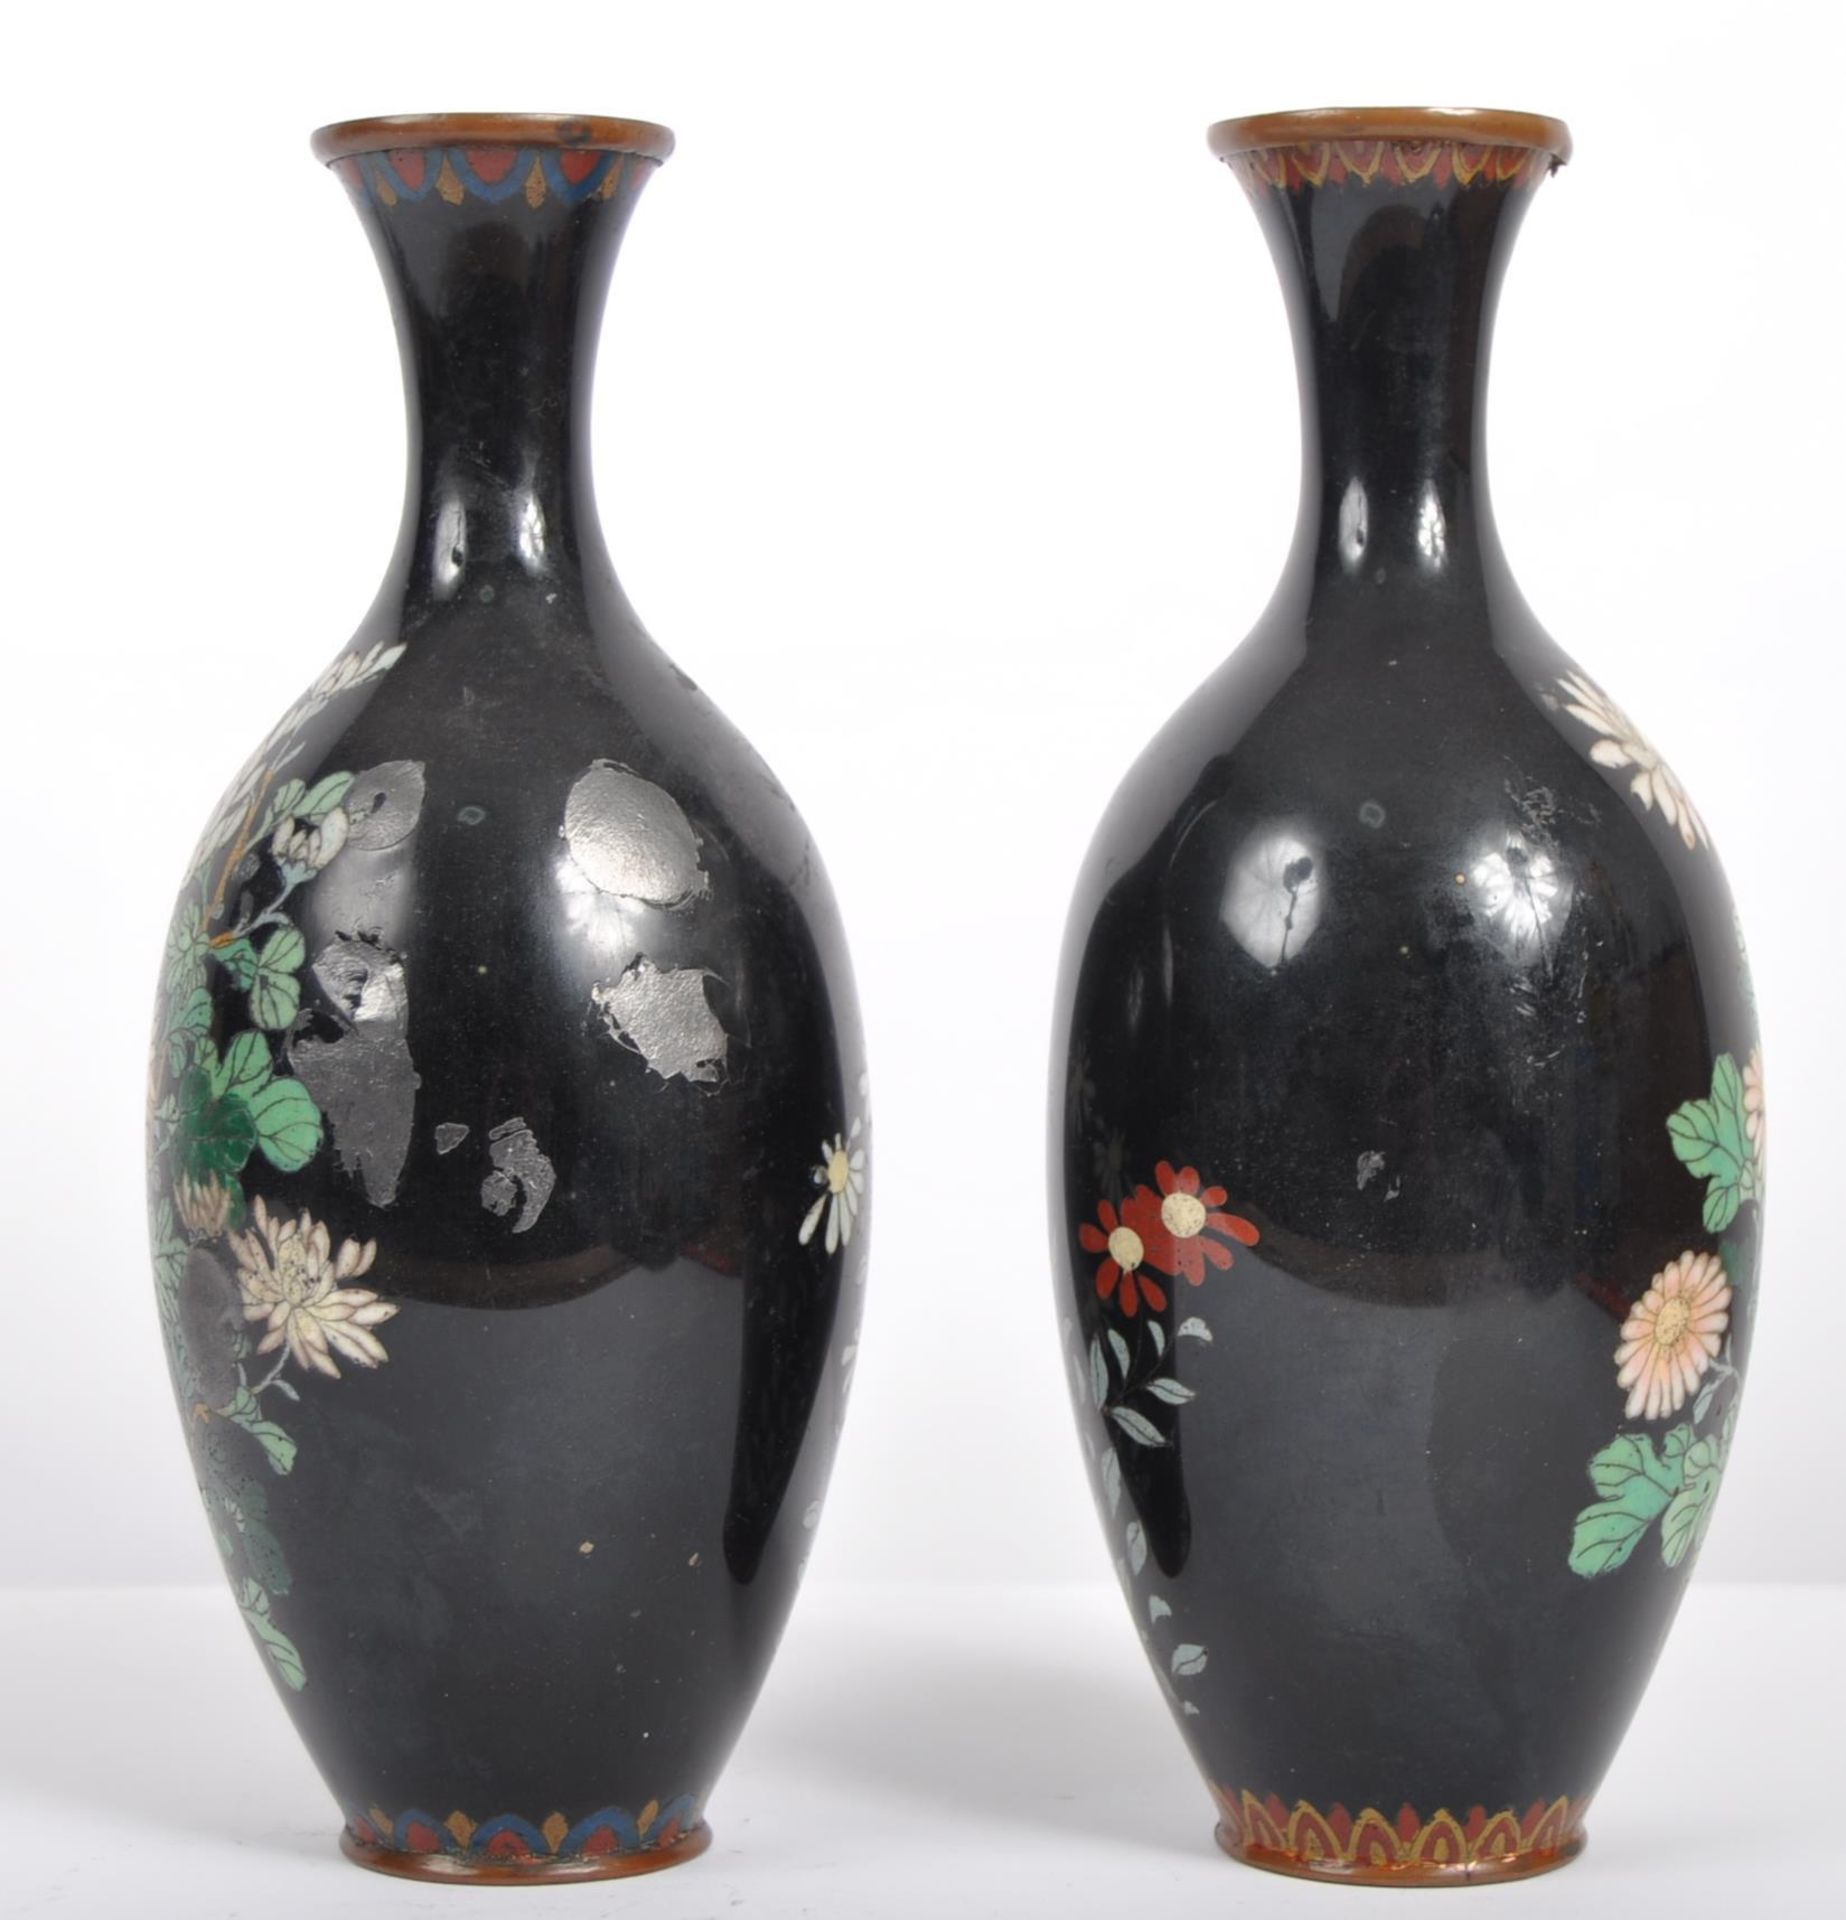 PAIR OF 20TH CENTURY CHINESE CLOISONNE VASES - Image 4 of 6